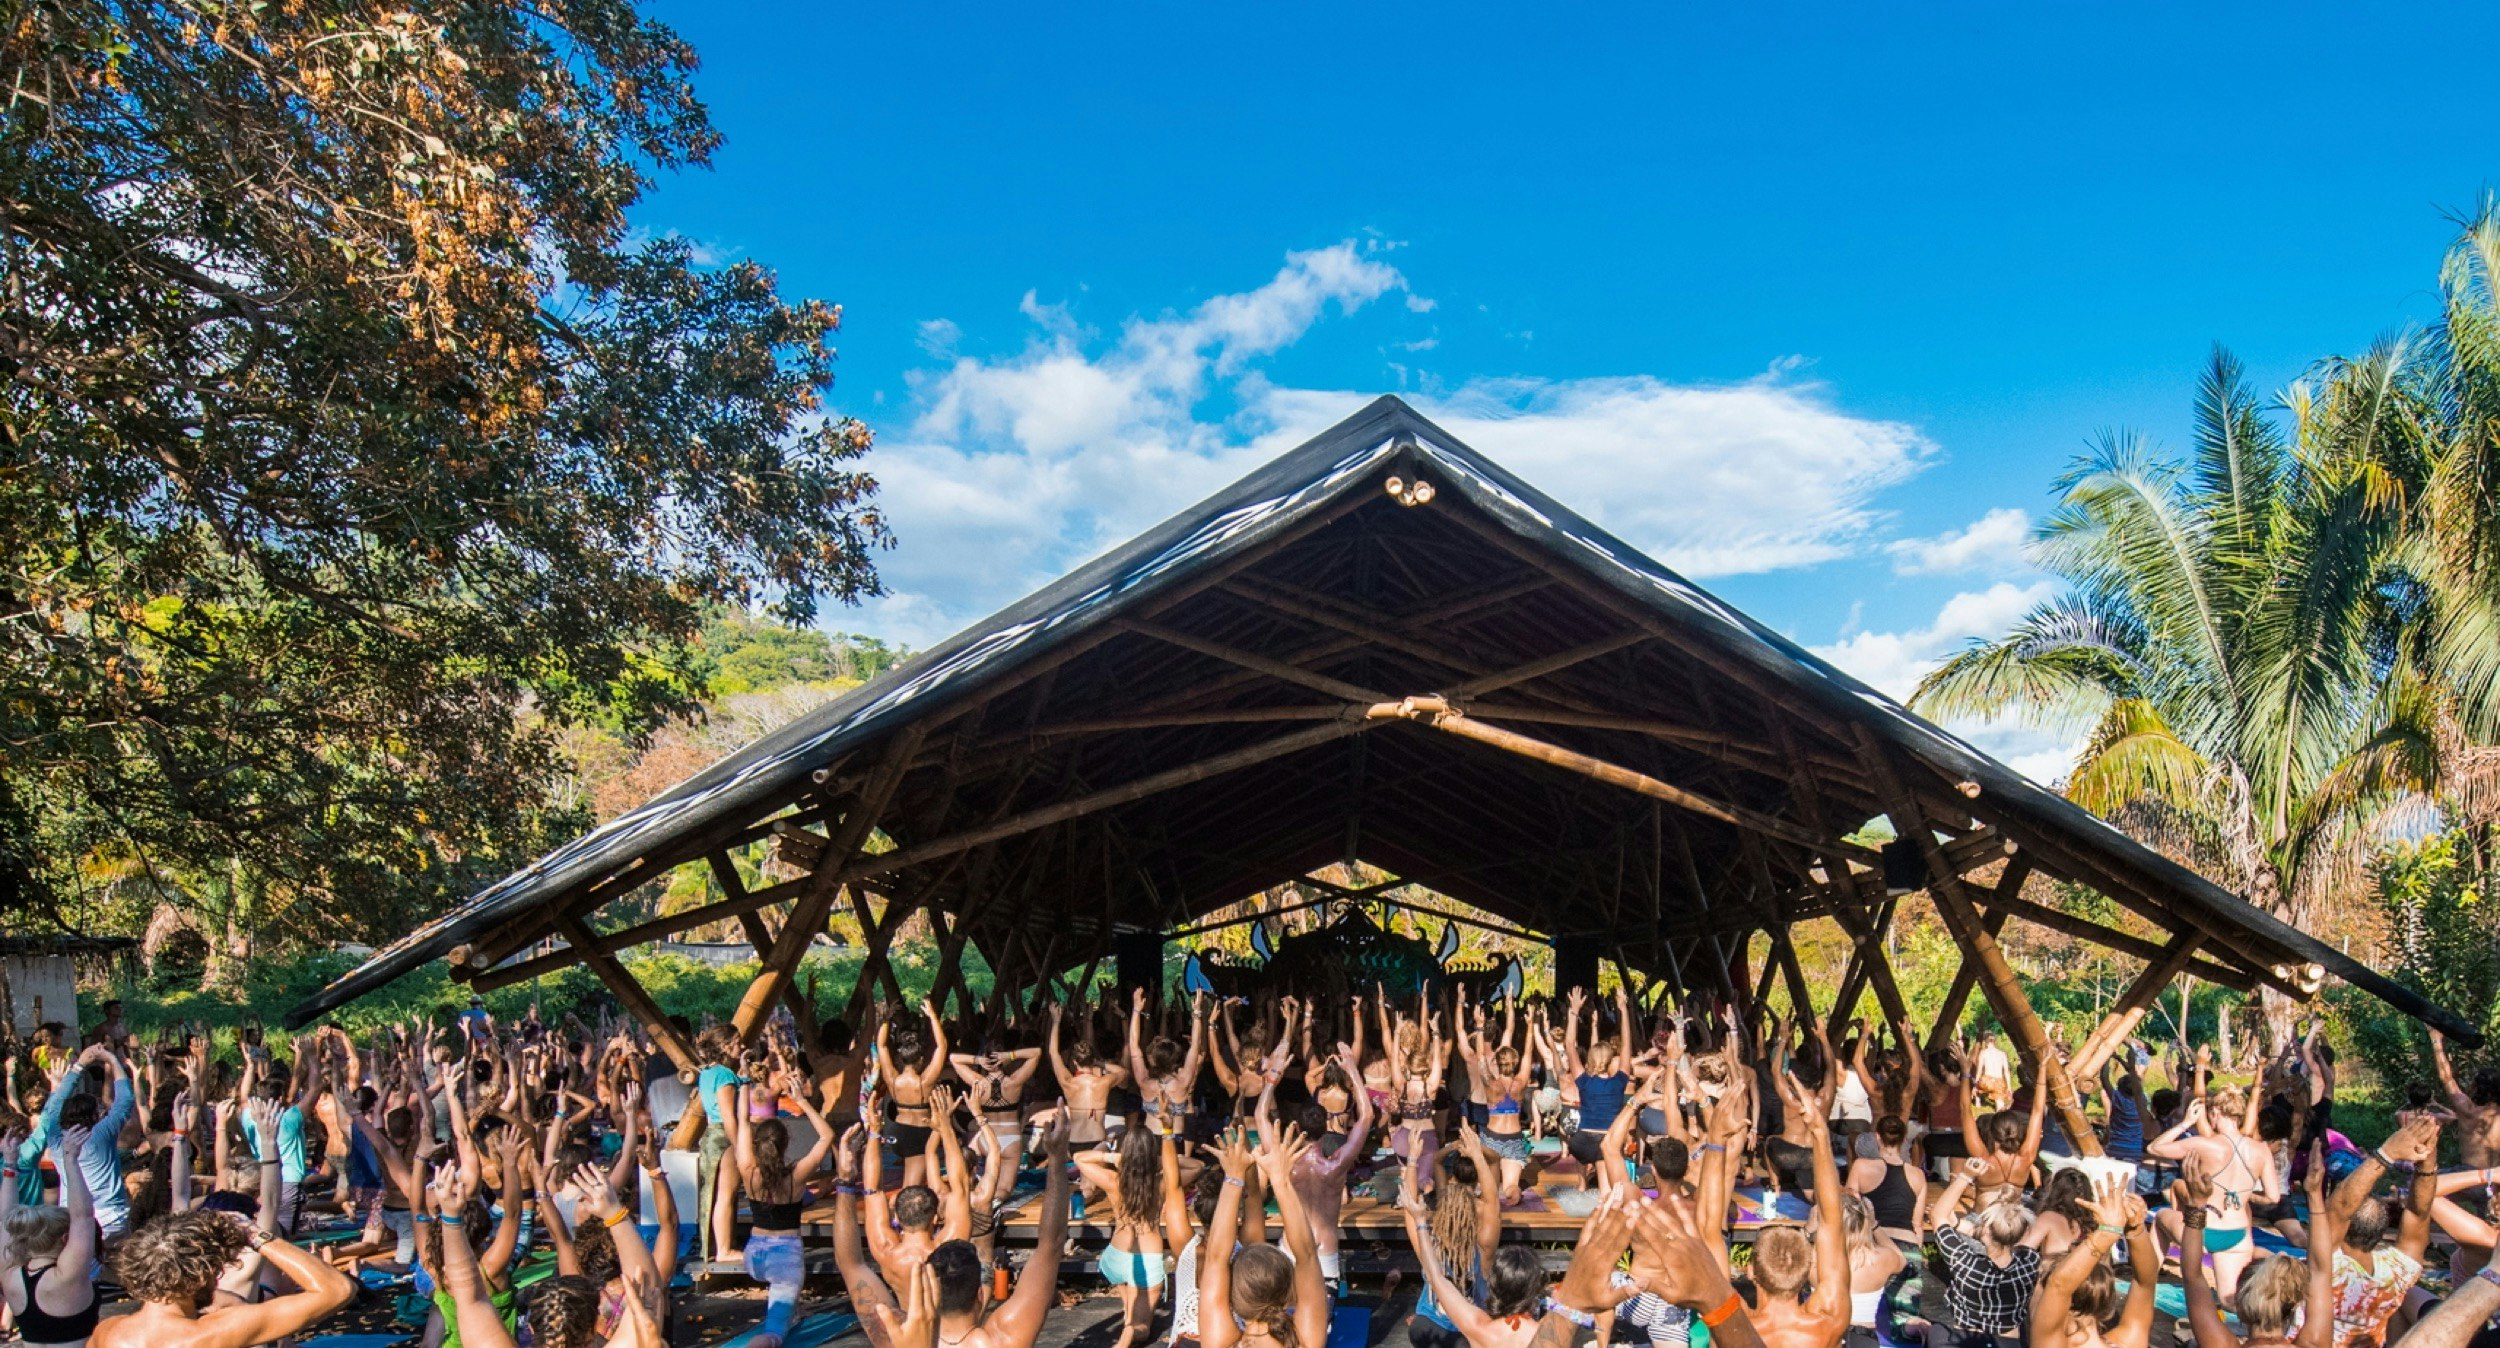 Hundreds of people do yoga exercises in front of an a-frame temple in Costa Rica